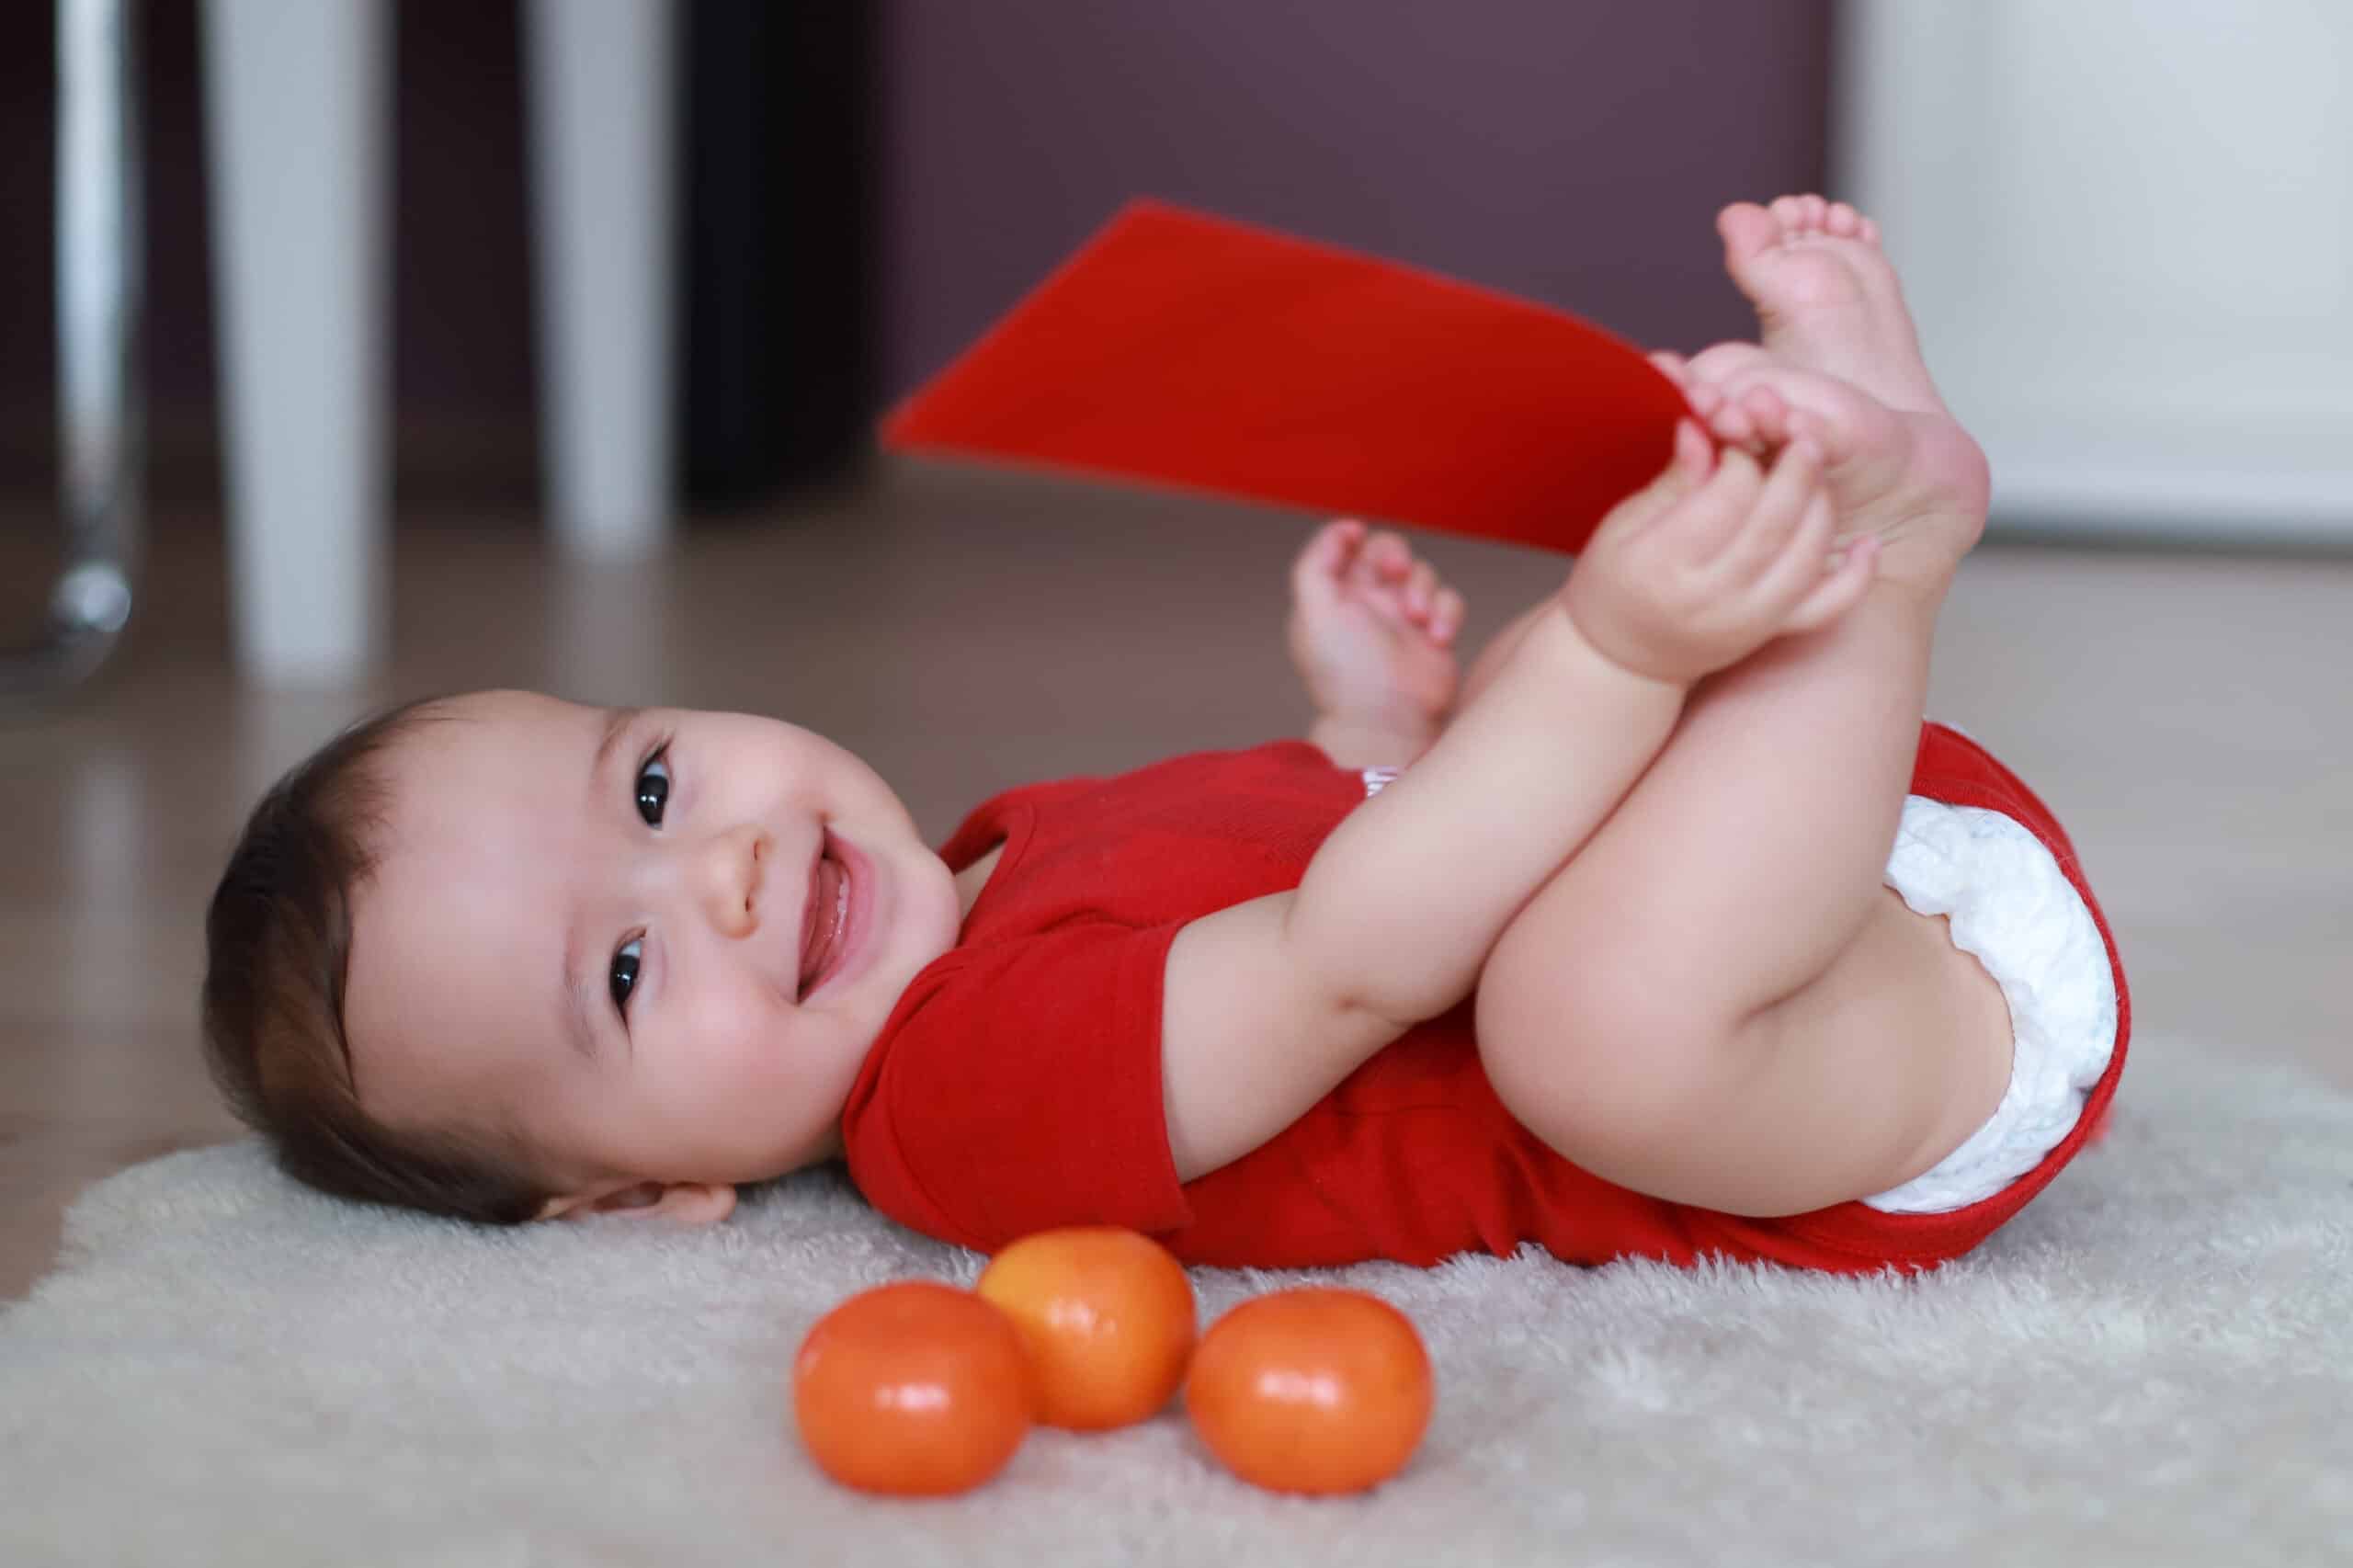 Cute baby boy holding a red envelope lying next to fresh mandarin orange with a smiling face concept for the Chinese lunar new year celebration. Happy mixed-race Asian-German infant.